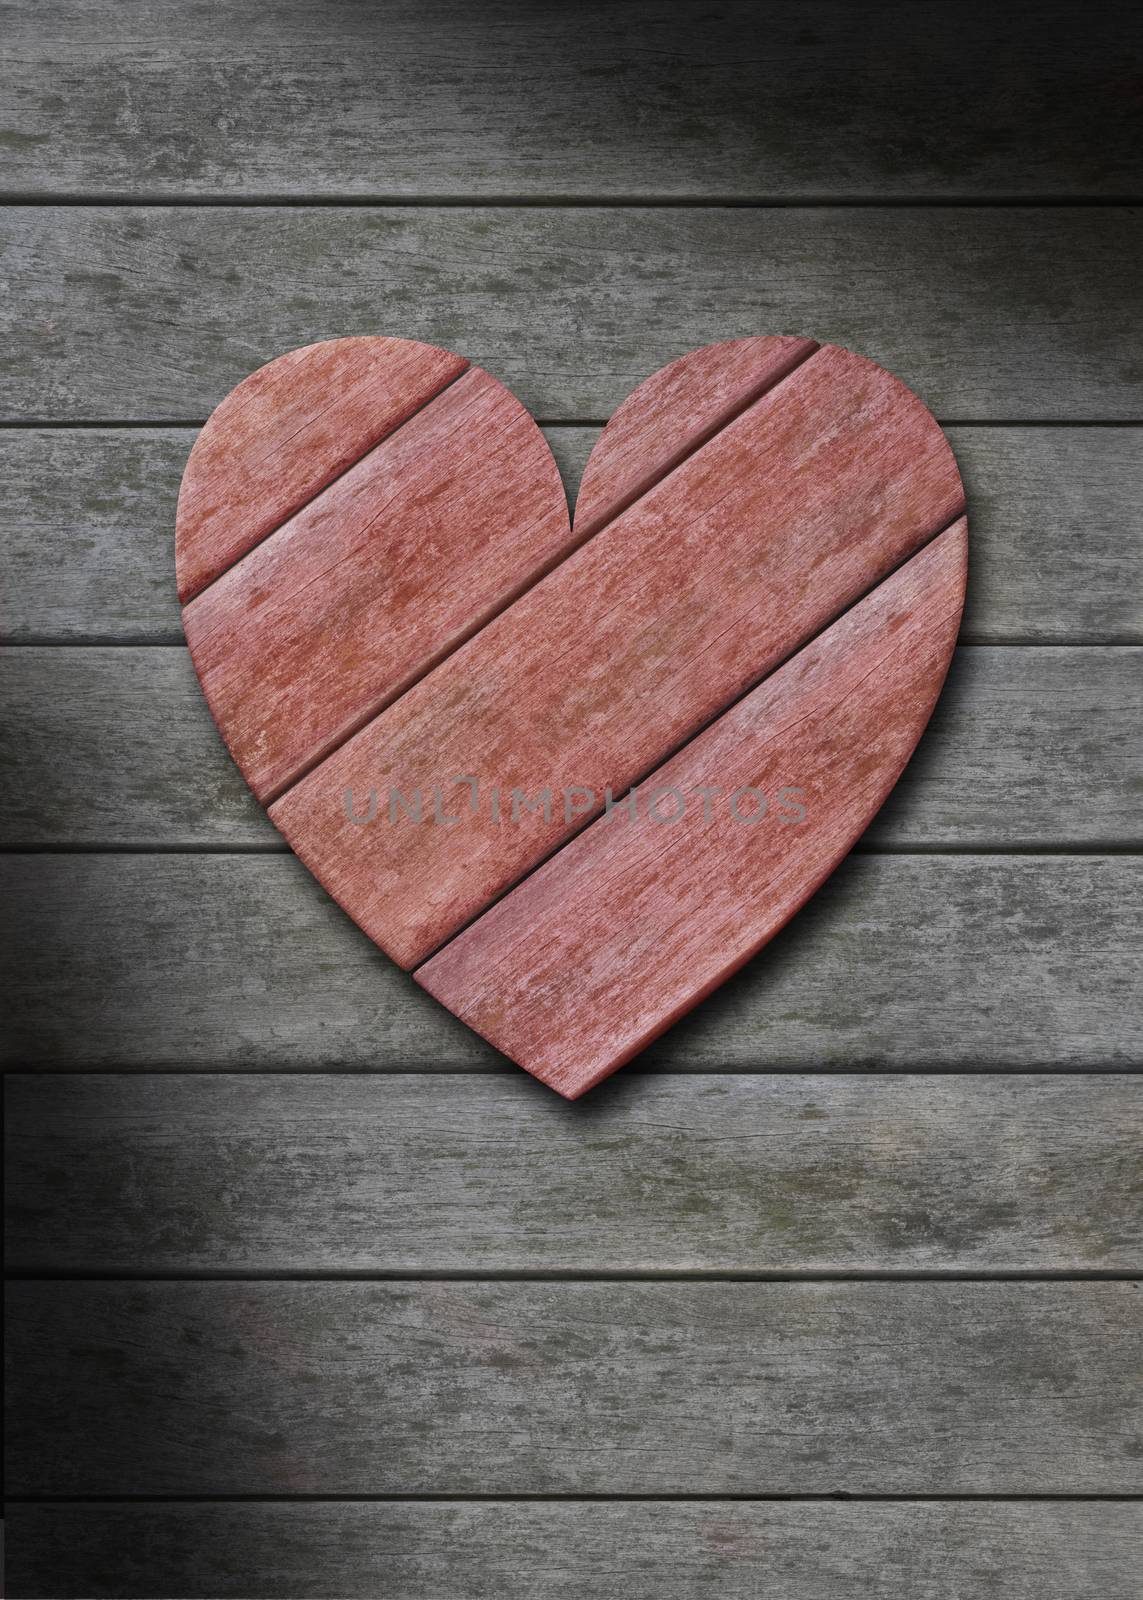 Red wood heart against a gray weathered wooden background